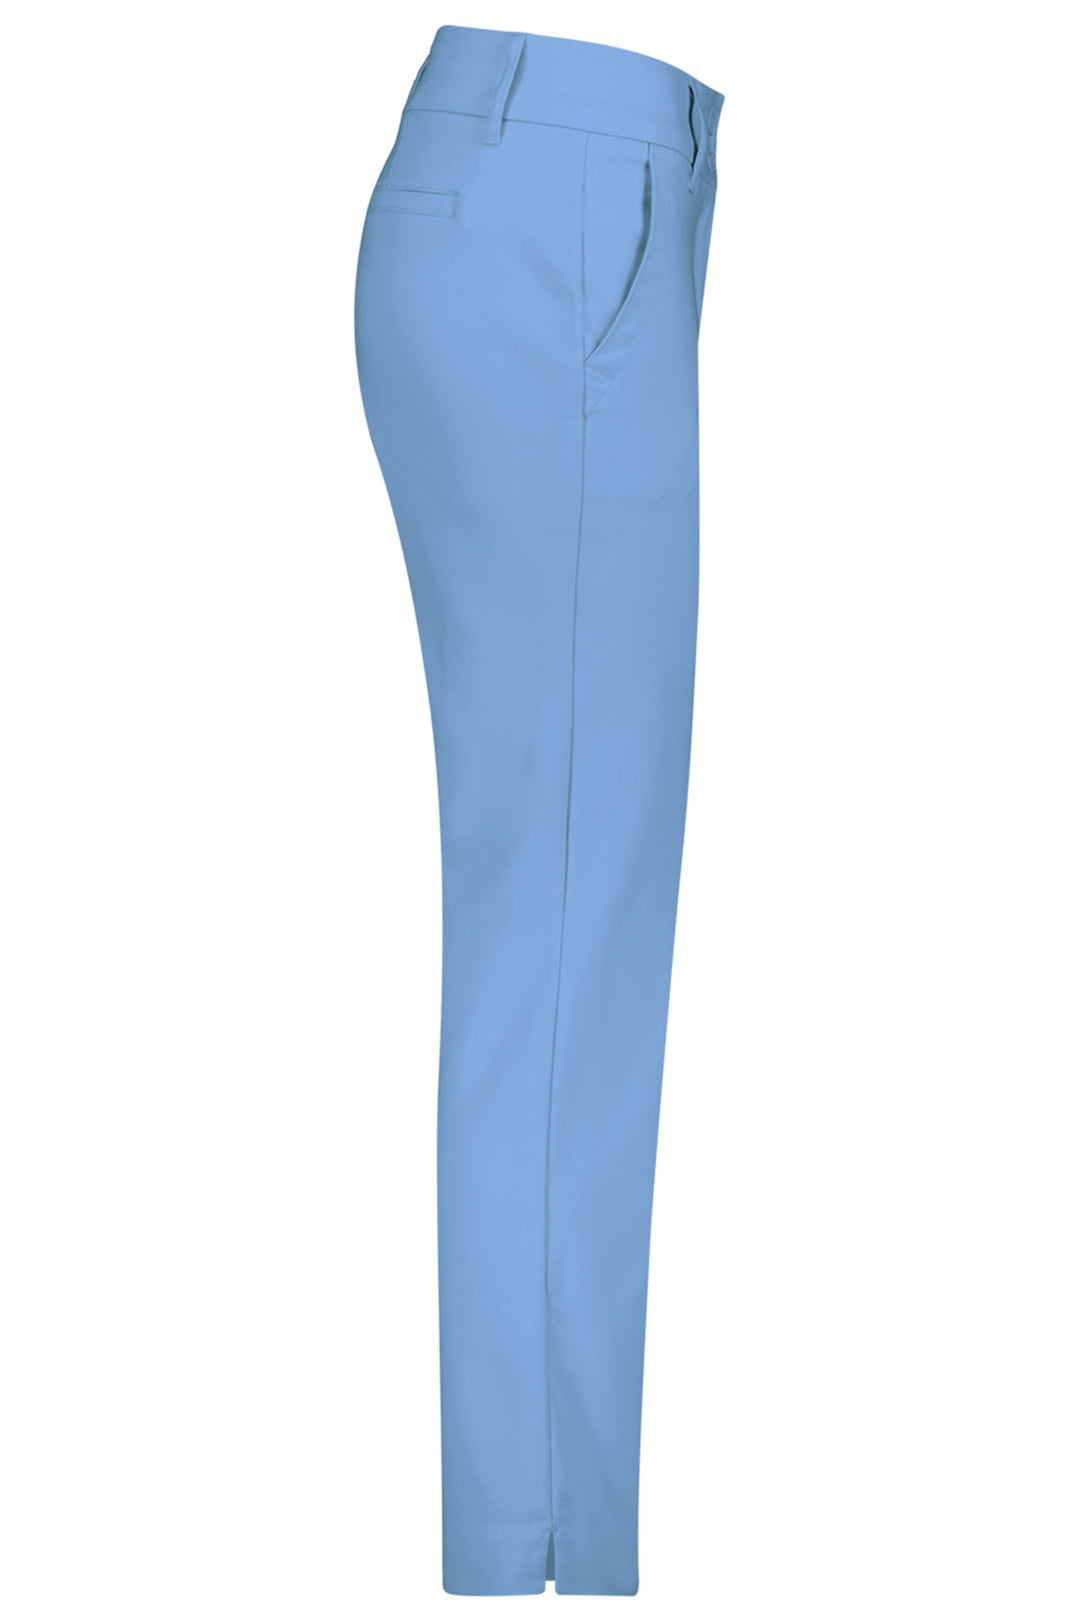 Red Button SRB4205 Diana Crop Mid Blue Smart Tapered Trousers - Dotique